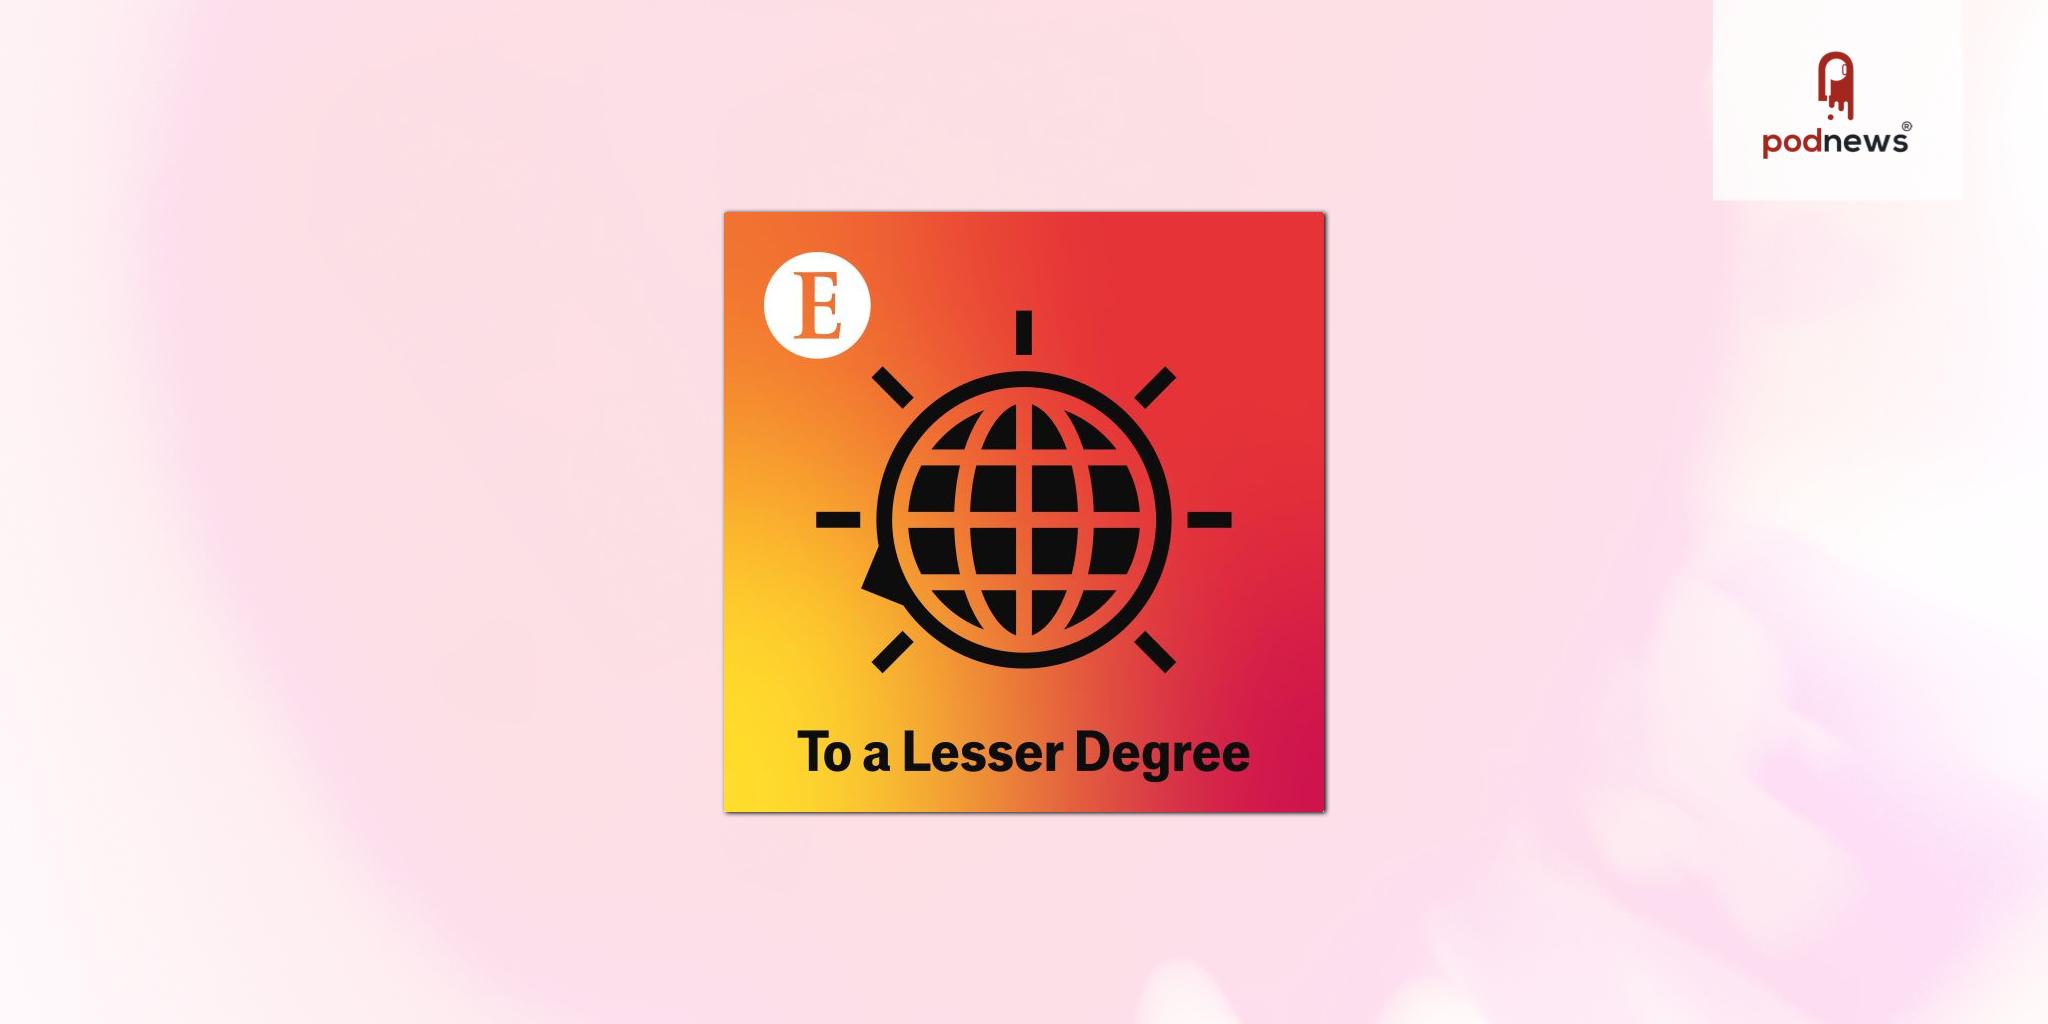 The Economist launches podcast “To a Lesser Degree” ahead of United Nations COP26 climate conference